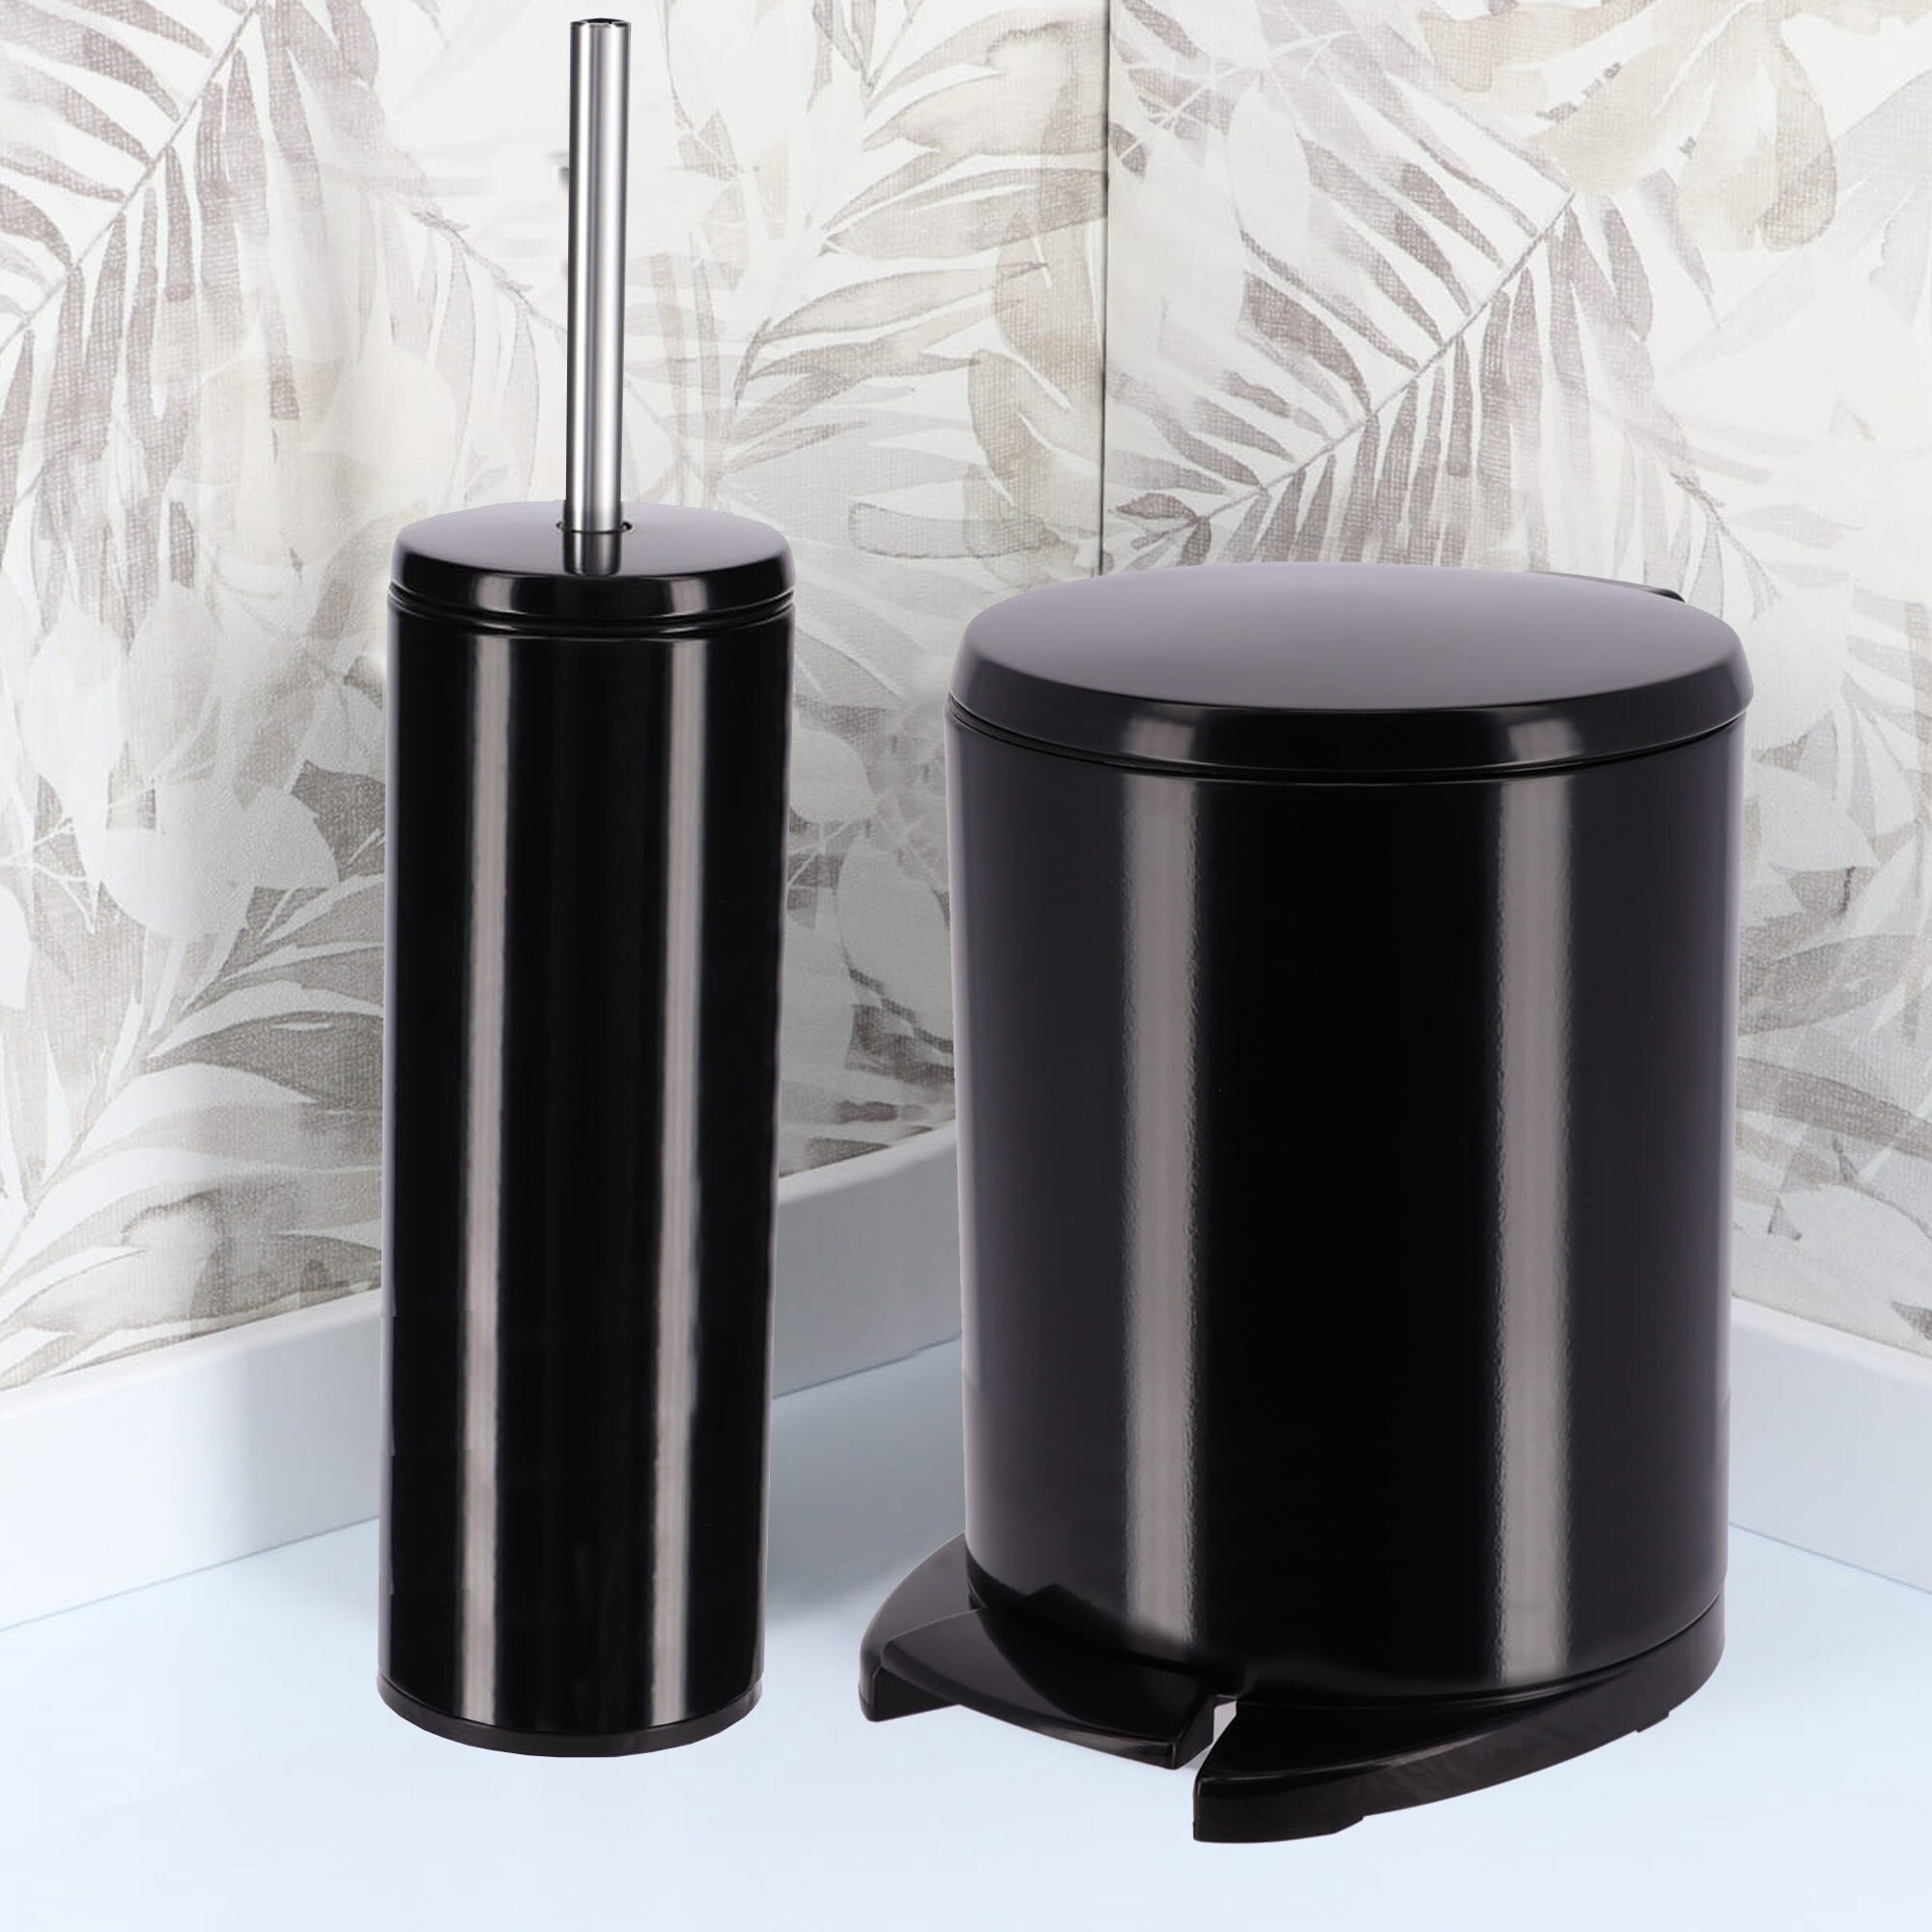 Stainless Steel Toilet Brush & Canister Set - Round